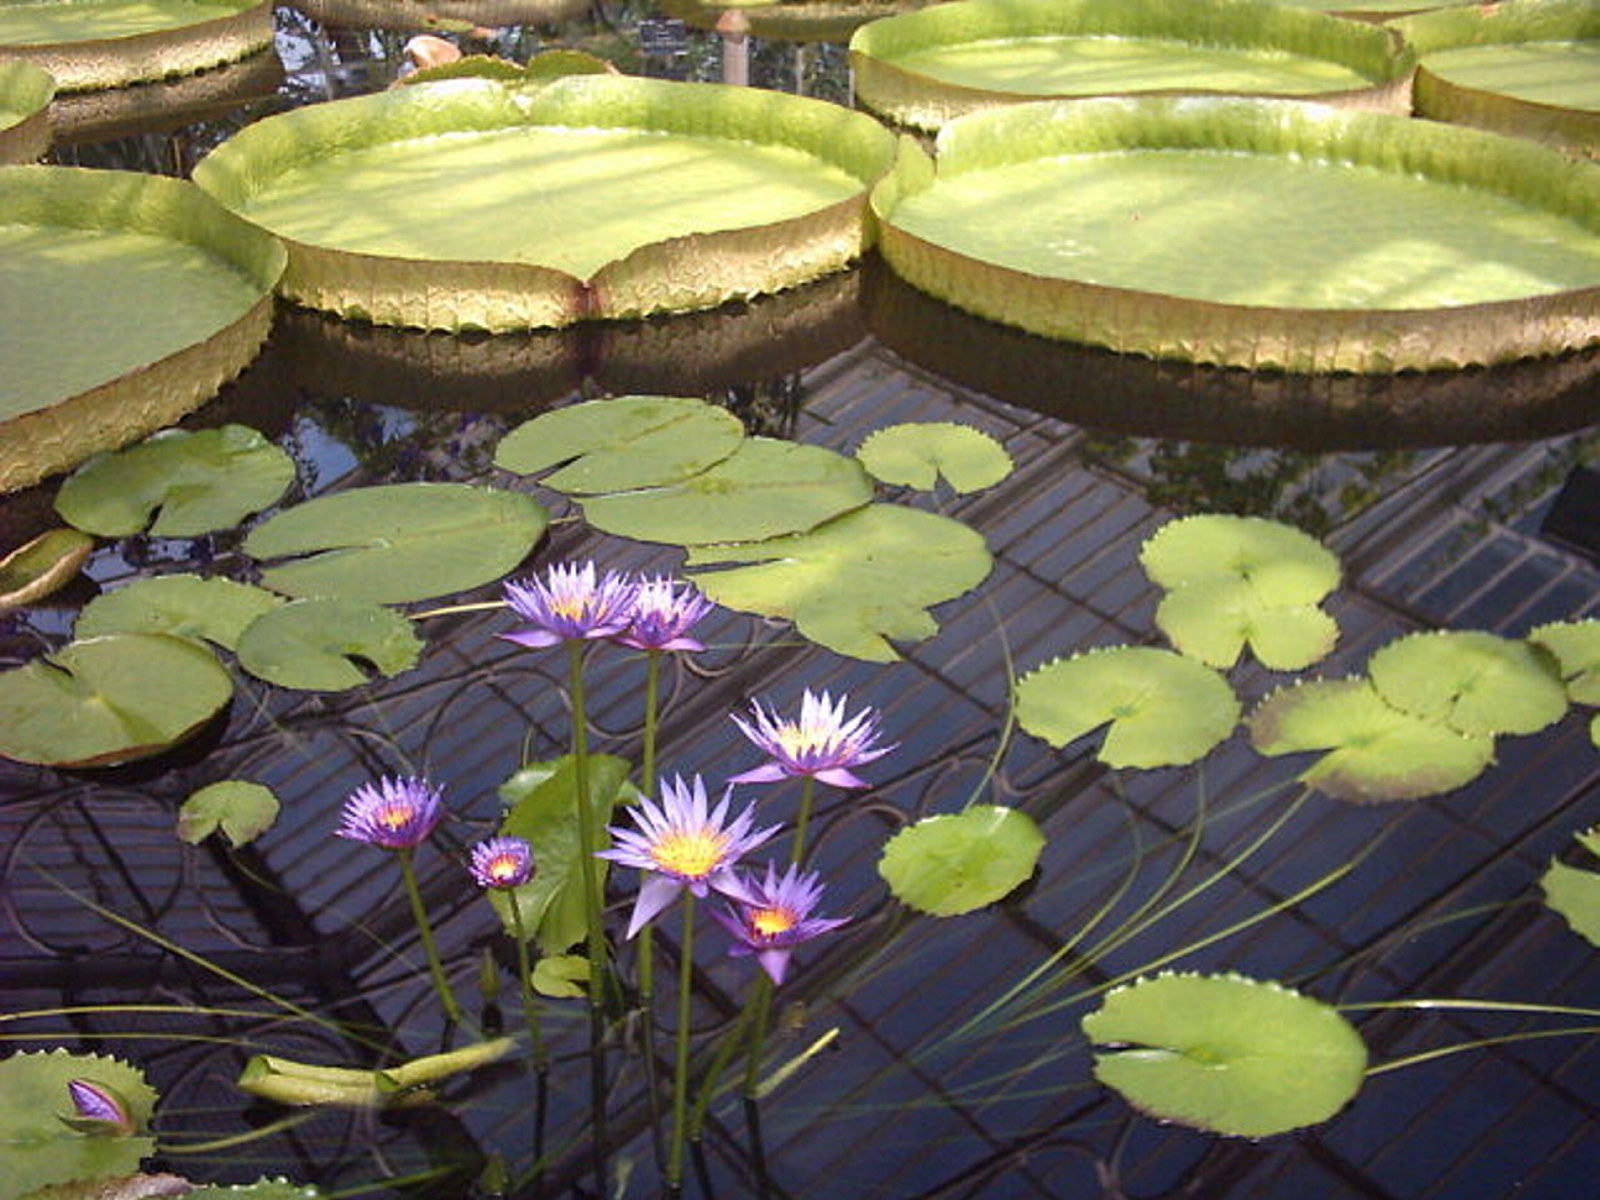 Big round green Waterlily platters float on the surface of the water with some purple flowers in the foreground.